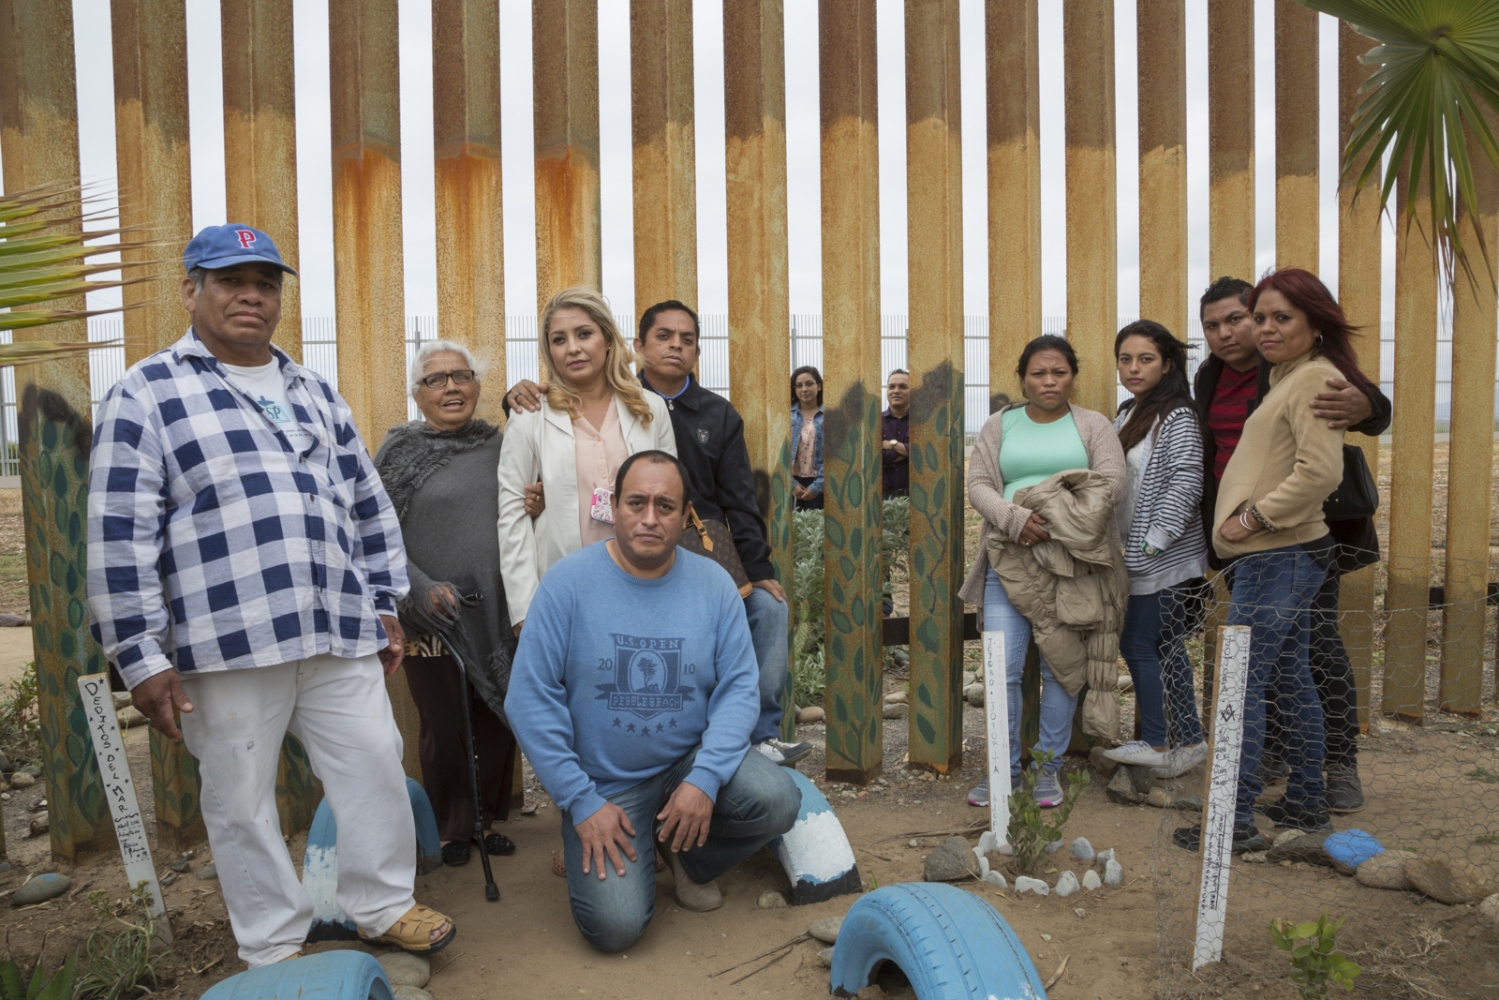 The Salgado family poses for a portrait. On the other side of the border fence (in the U.S.)...